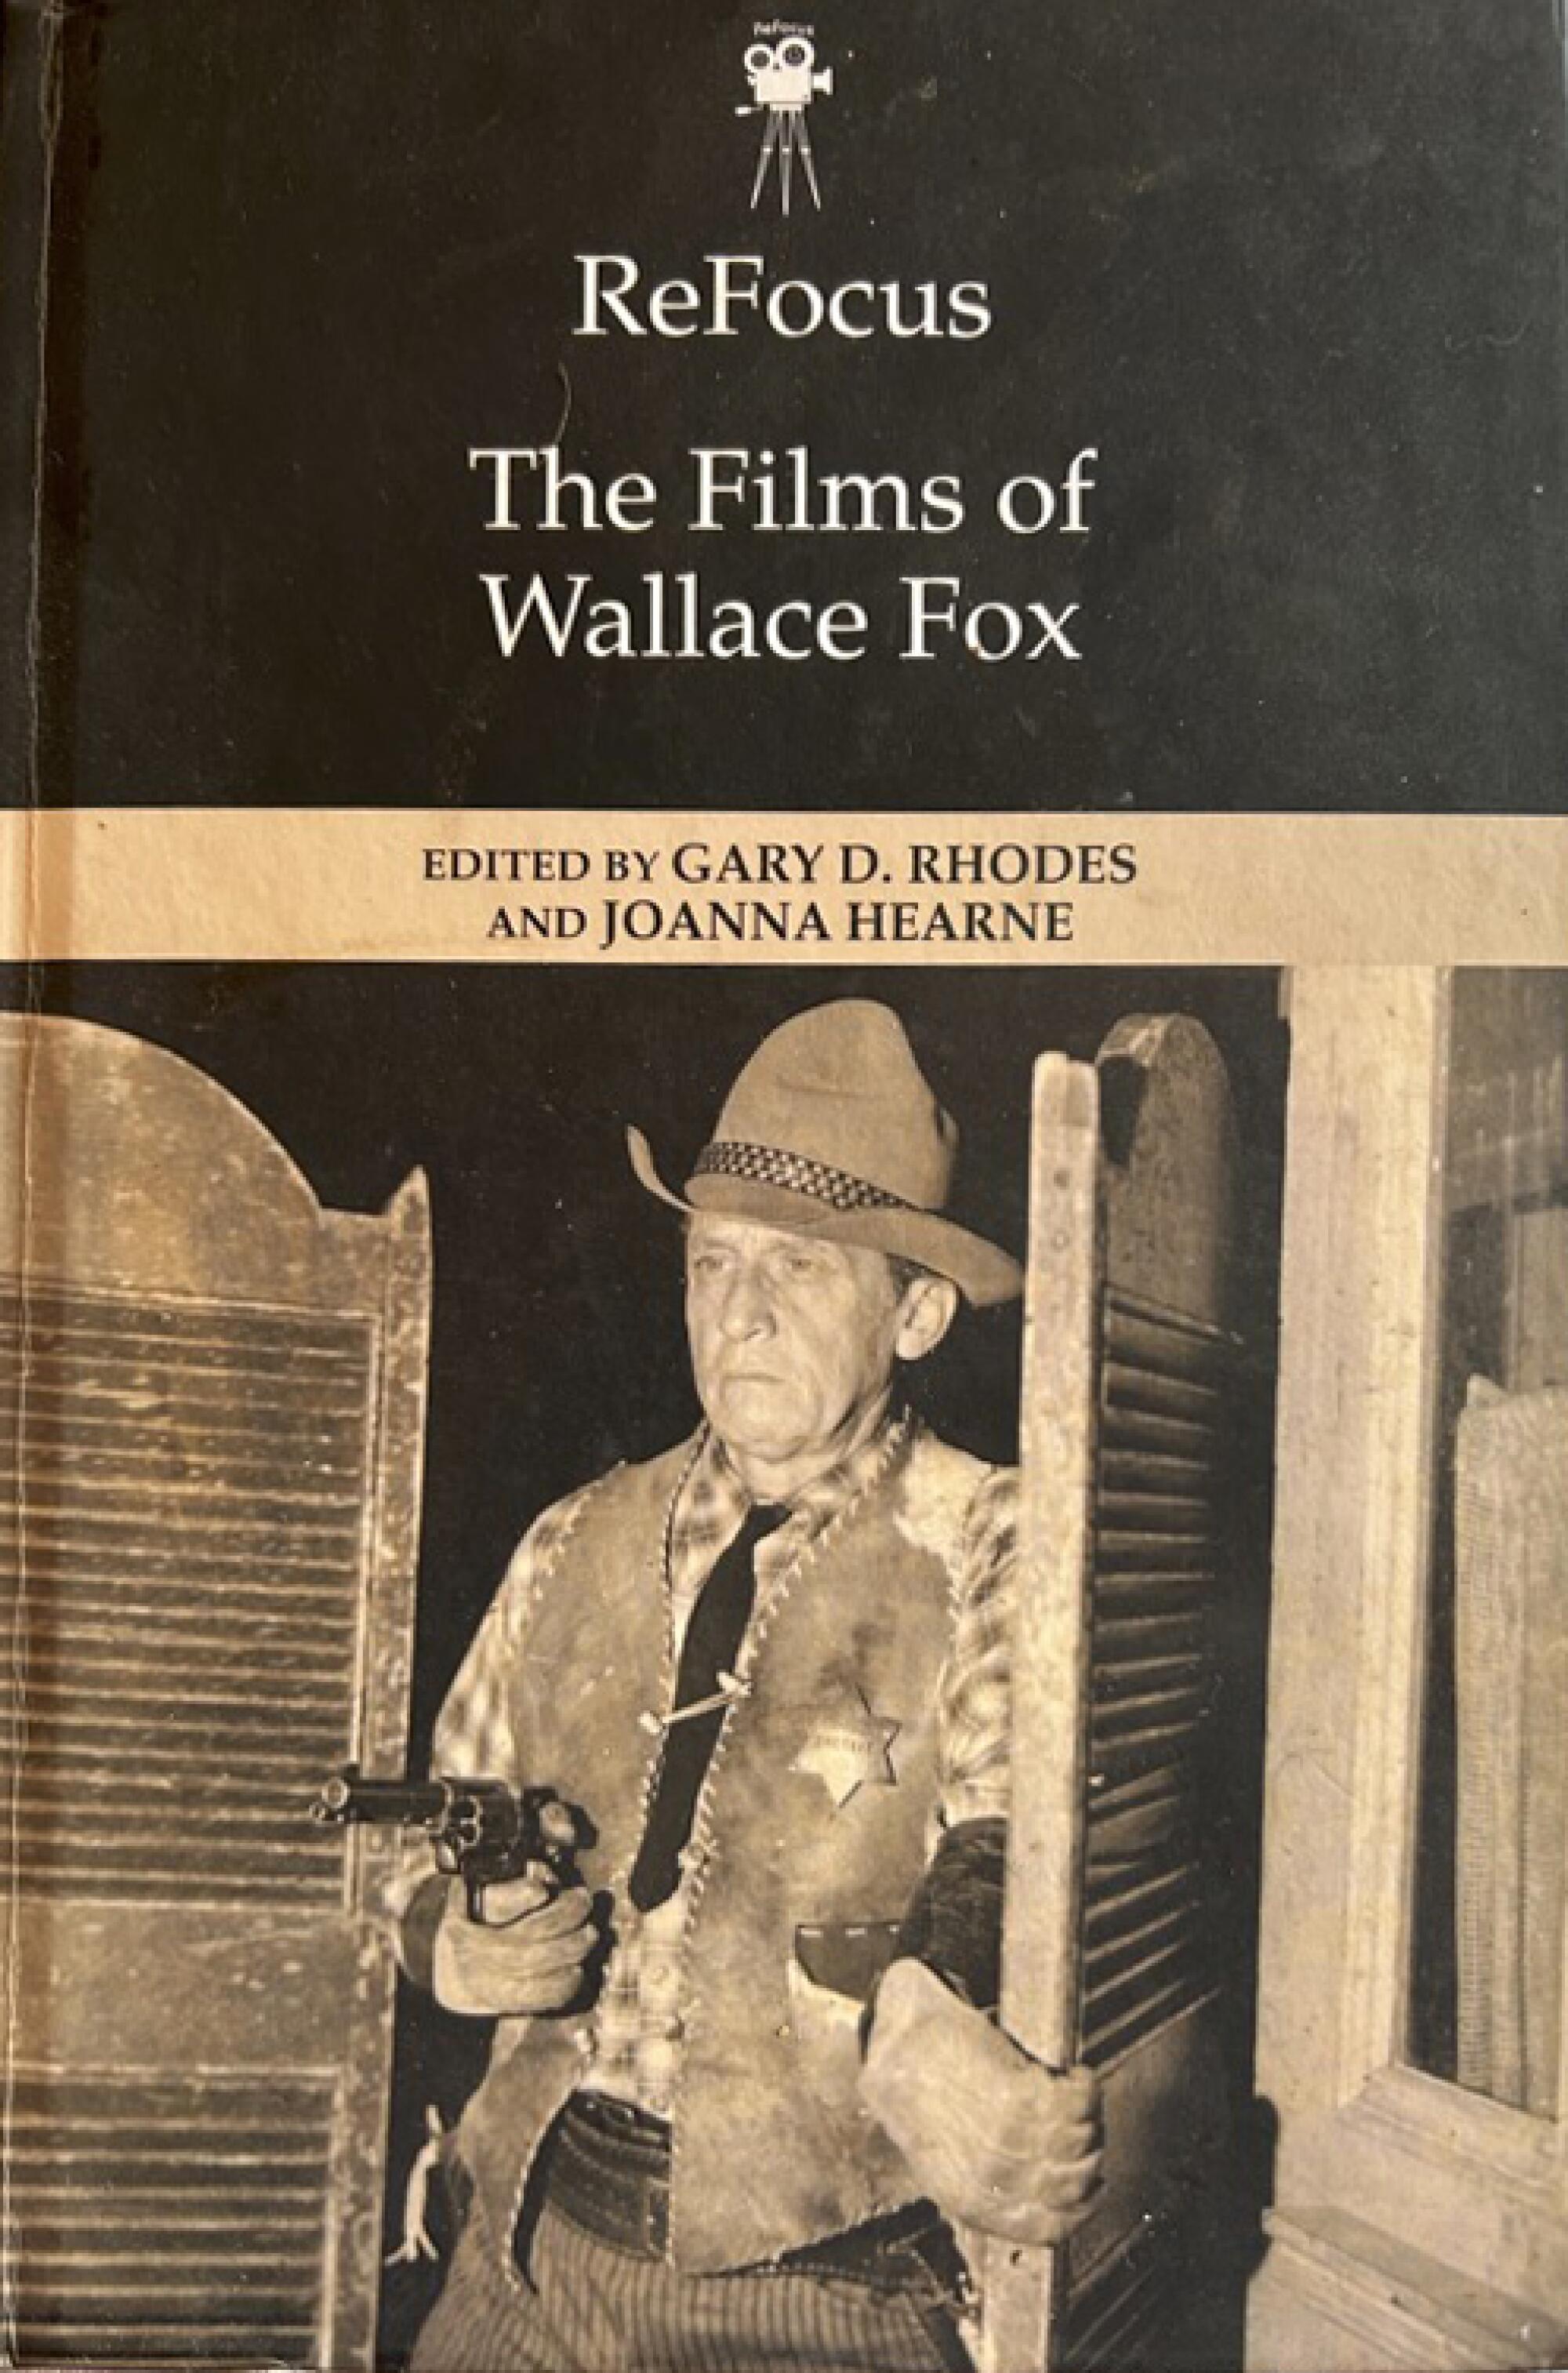 A book titled "The Films of Wallace Fox."